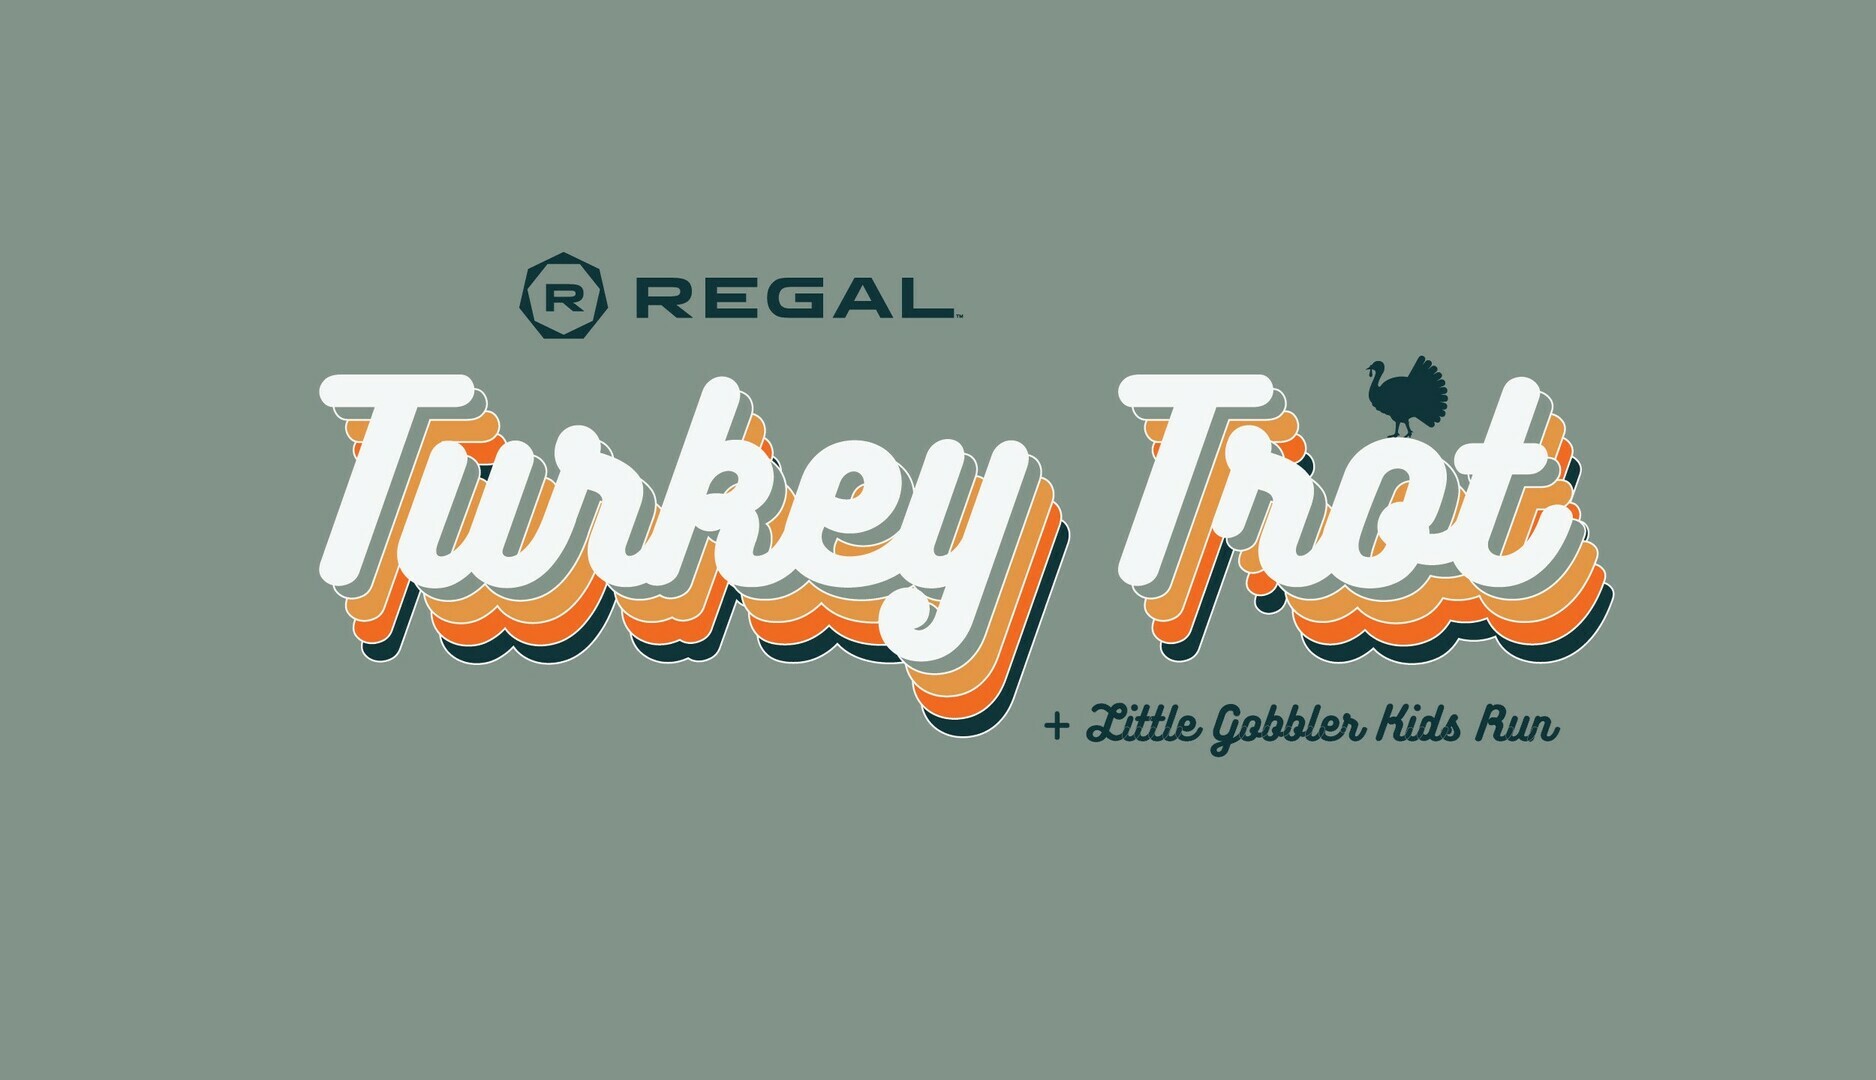 Regal Knoxville Turkey Trot 5k, Knoxville, Tennessee, United States